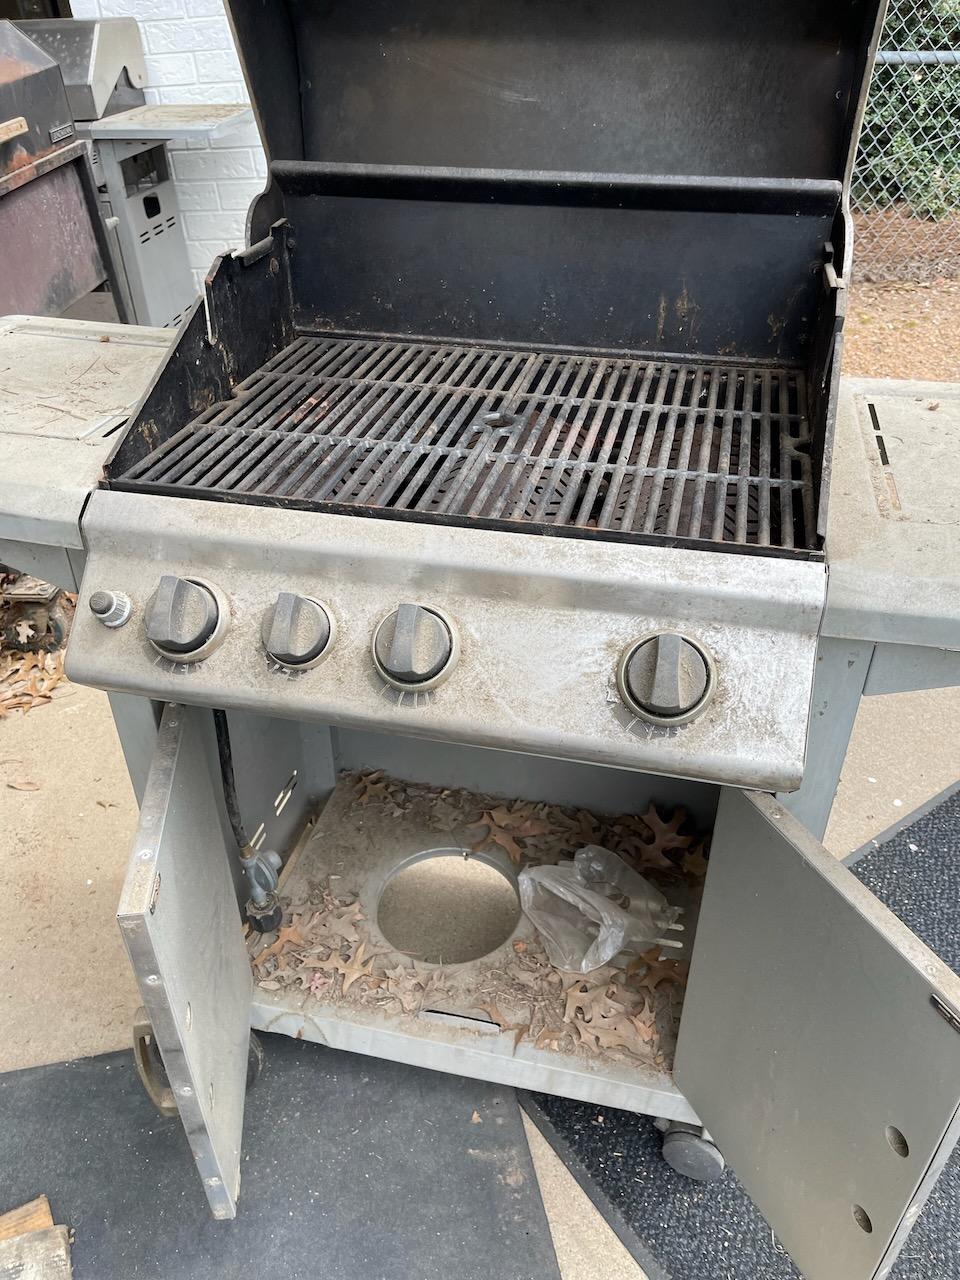 Broil-Mate Gas Grill